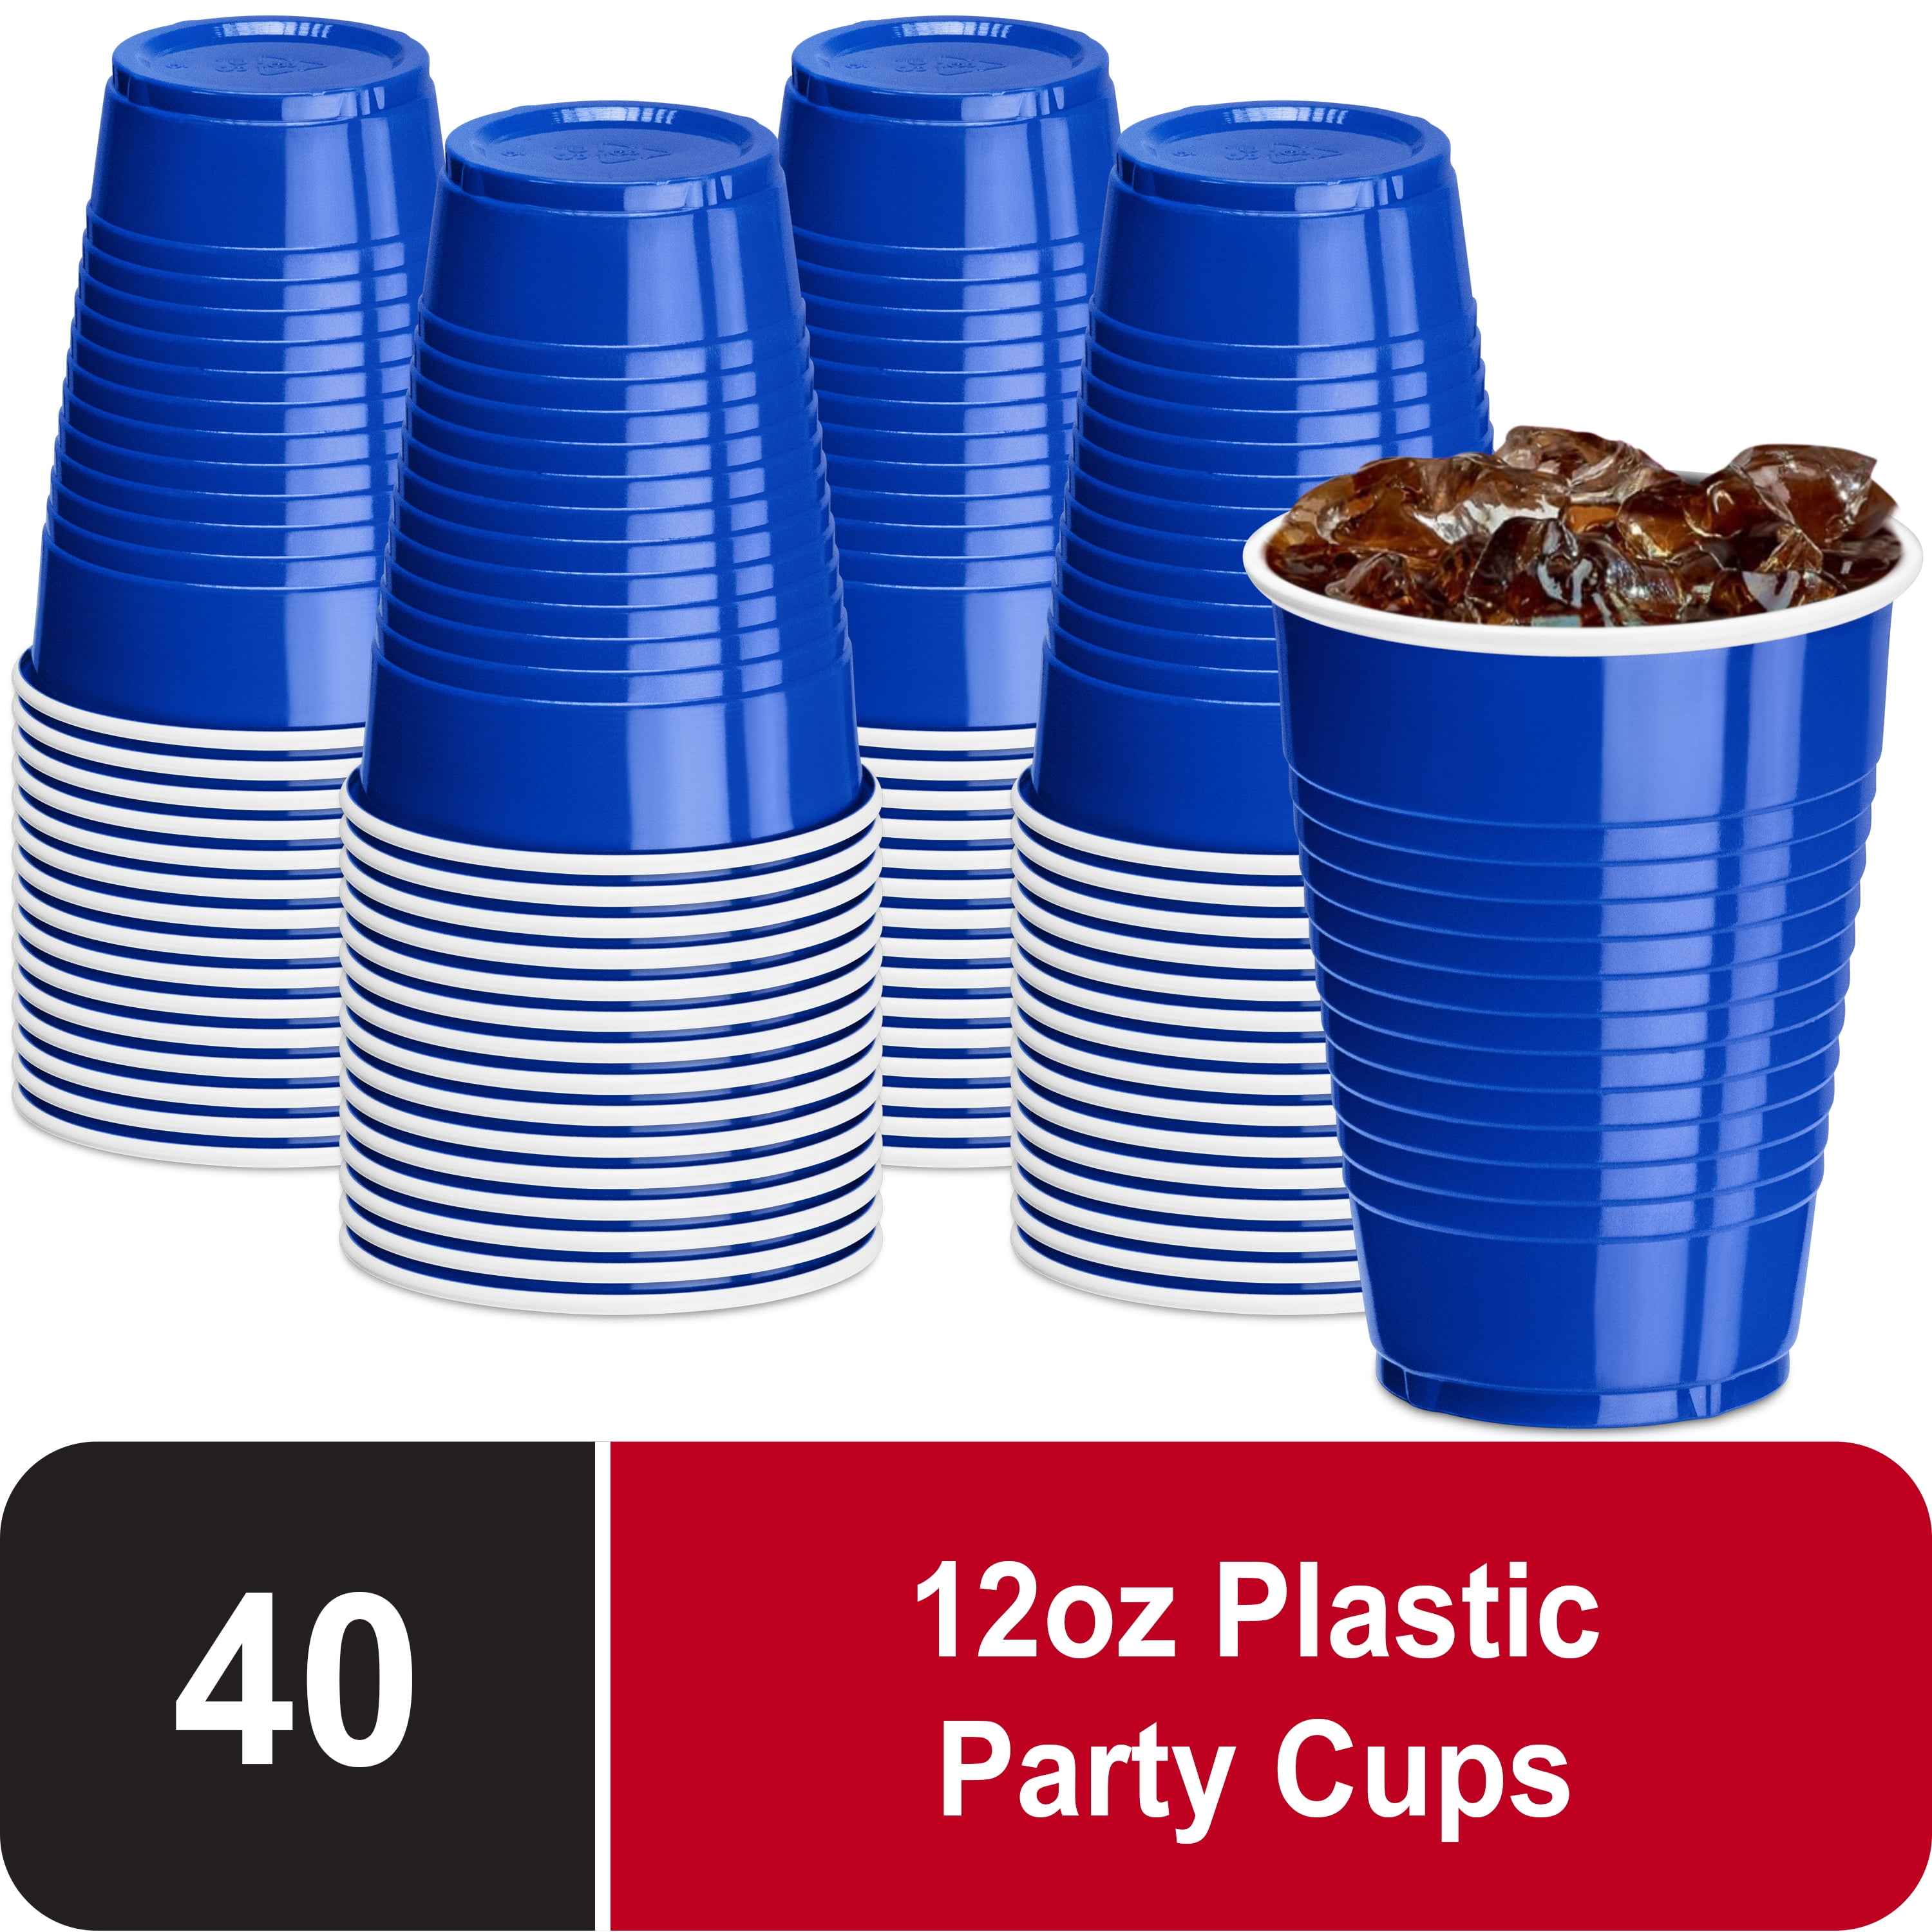 Ice Yard Cups (54 Cups - Red) - for Margaritas and Frozen Drinks Kids Parties - 17oz. (500ml)